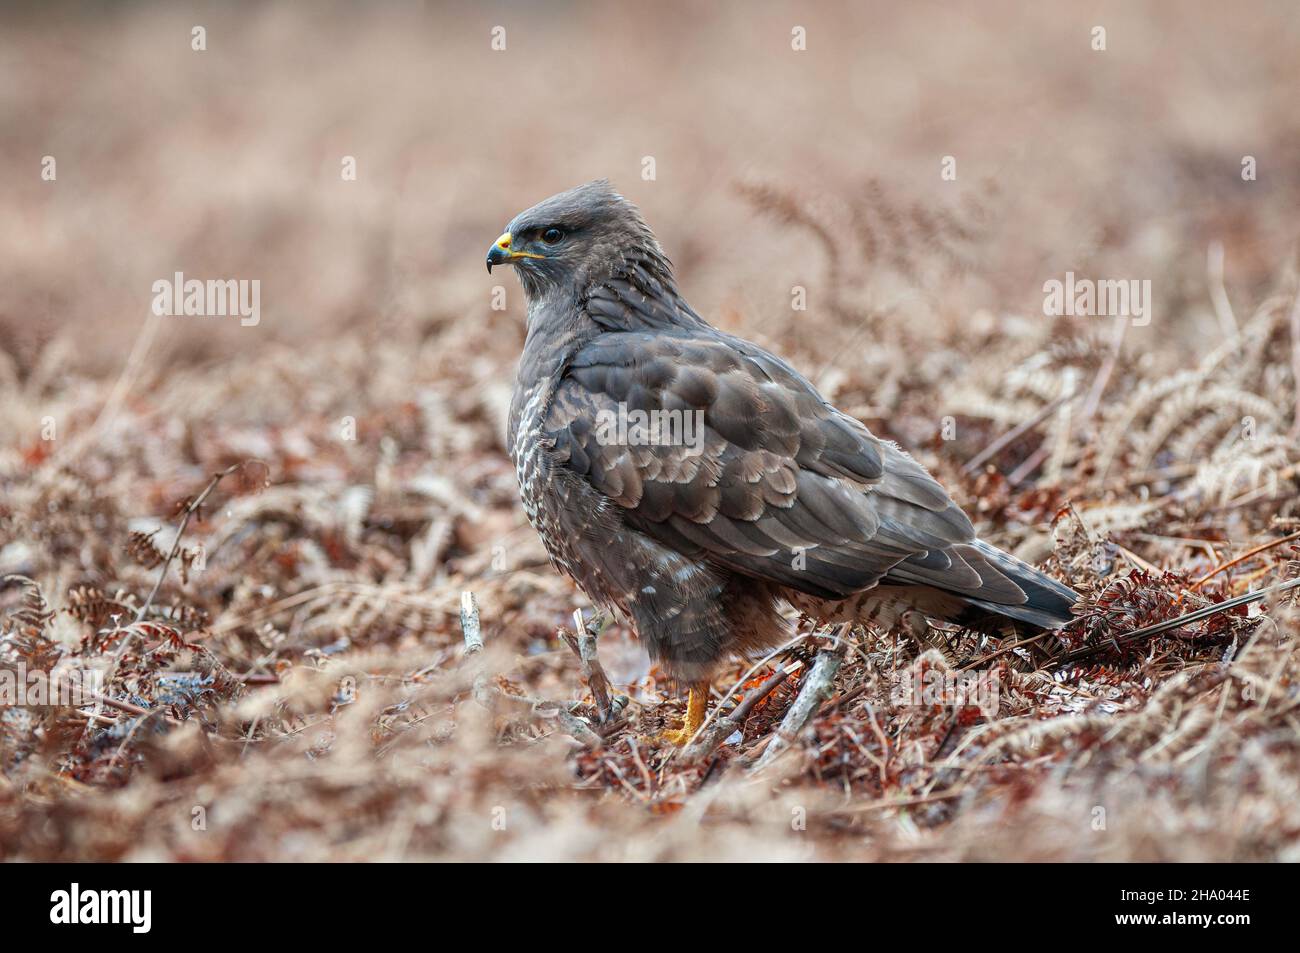 Common buzzard (Buteo buteo) standing on the ground in forest clearing Stock Photo